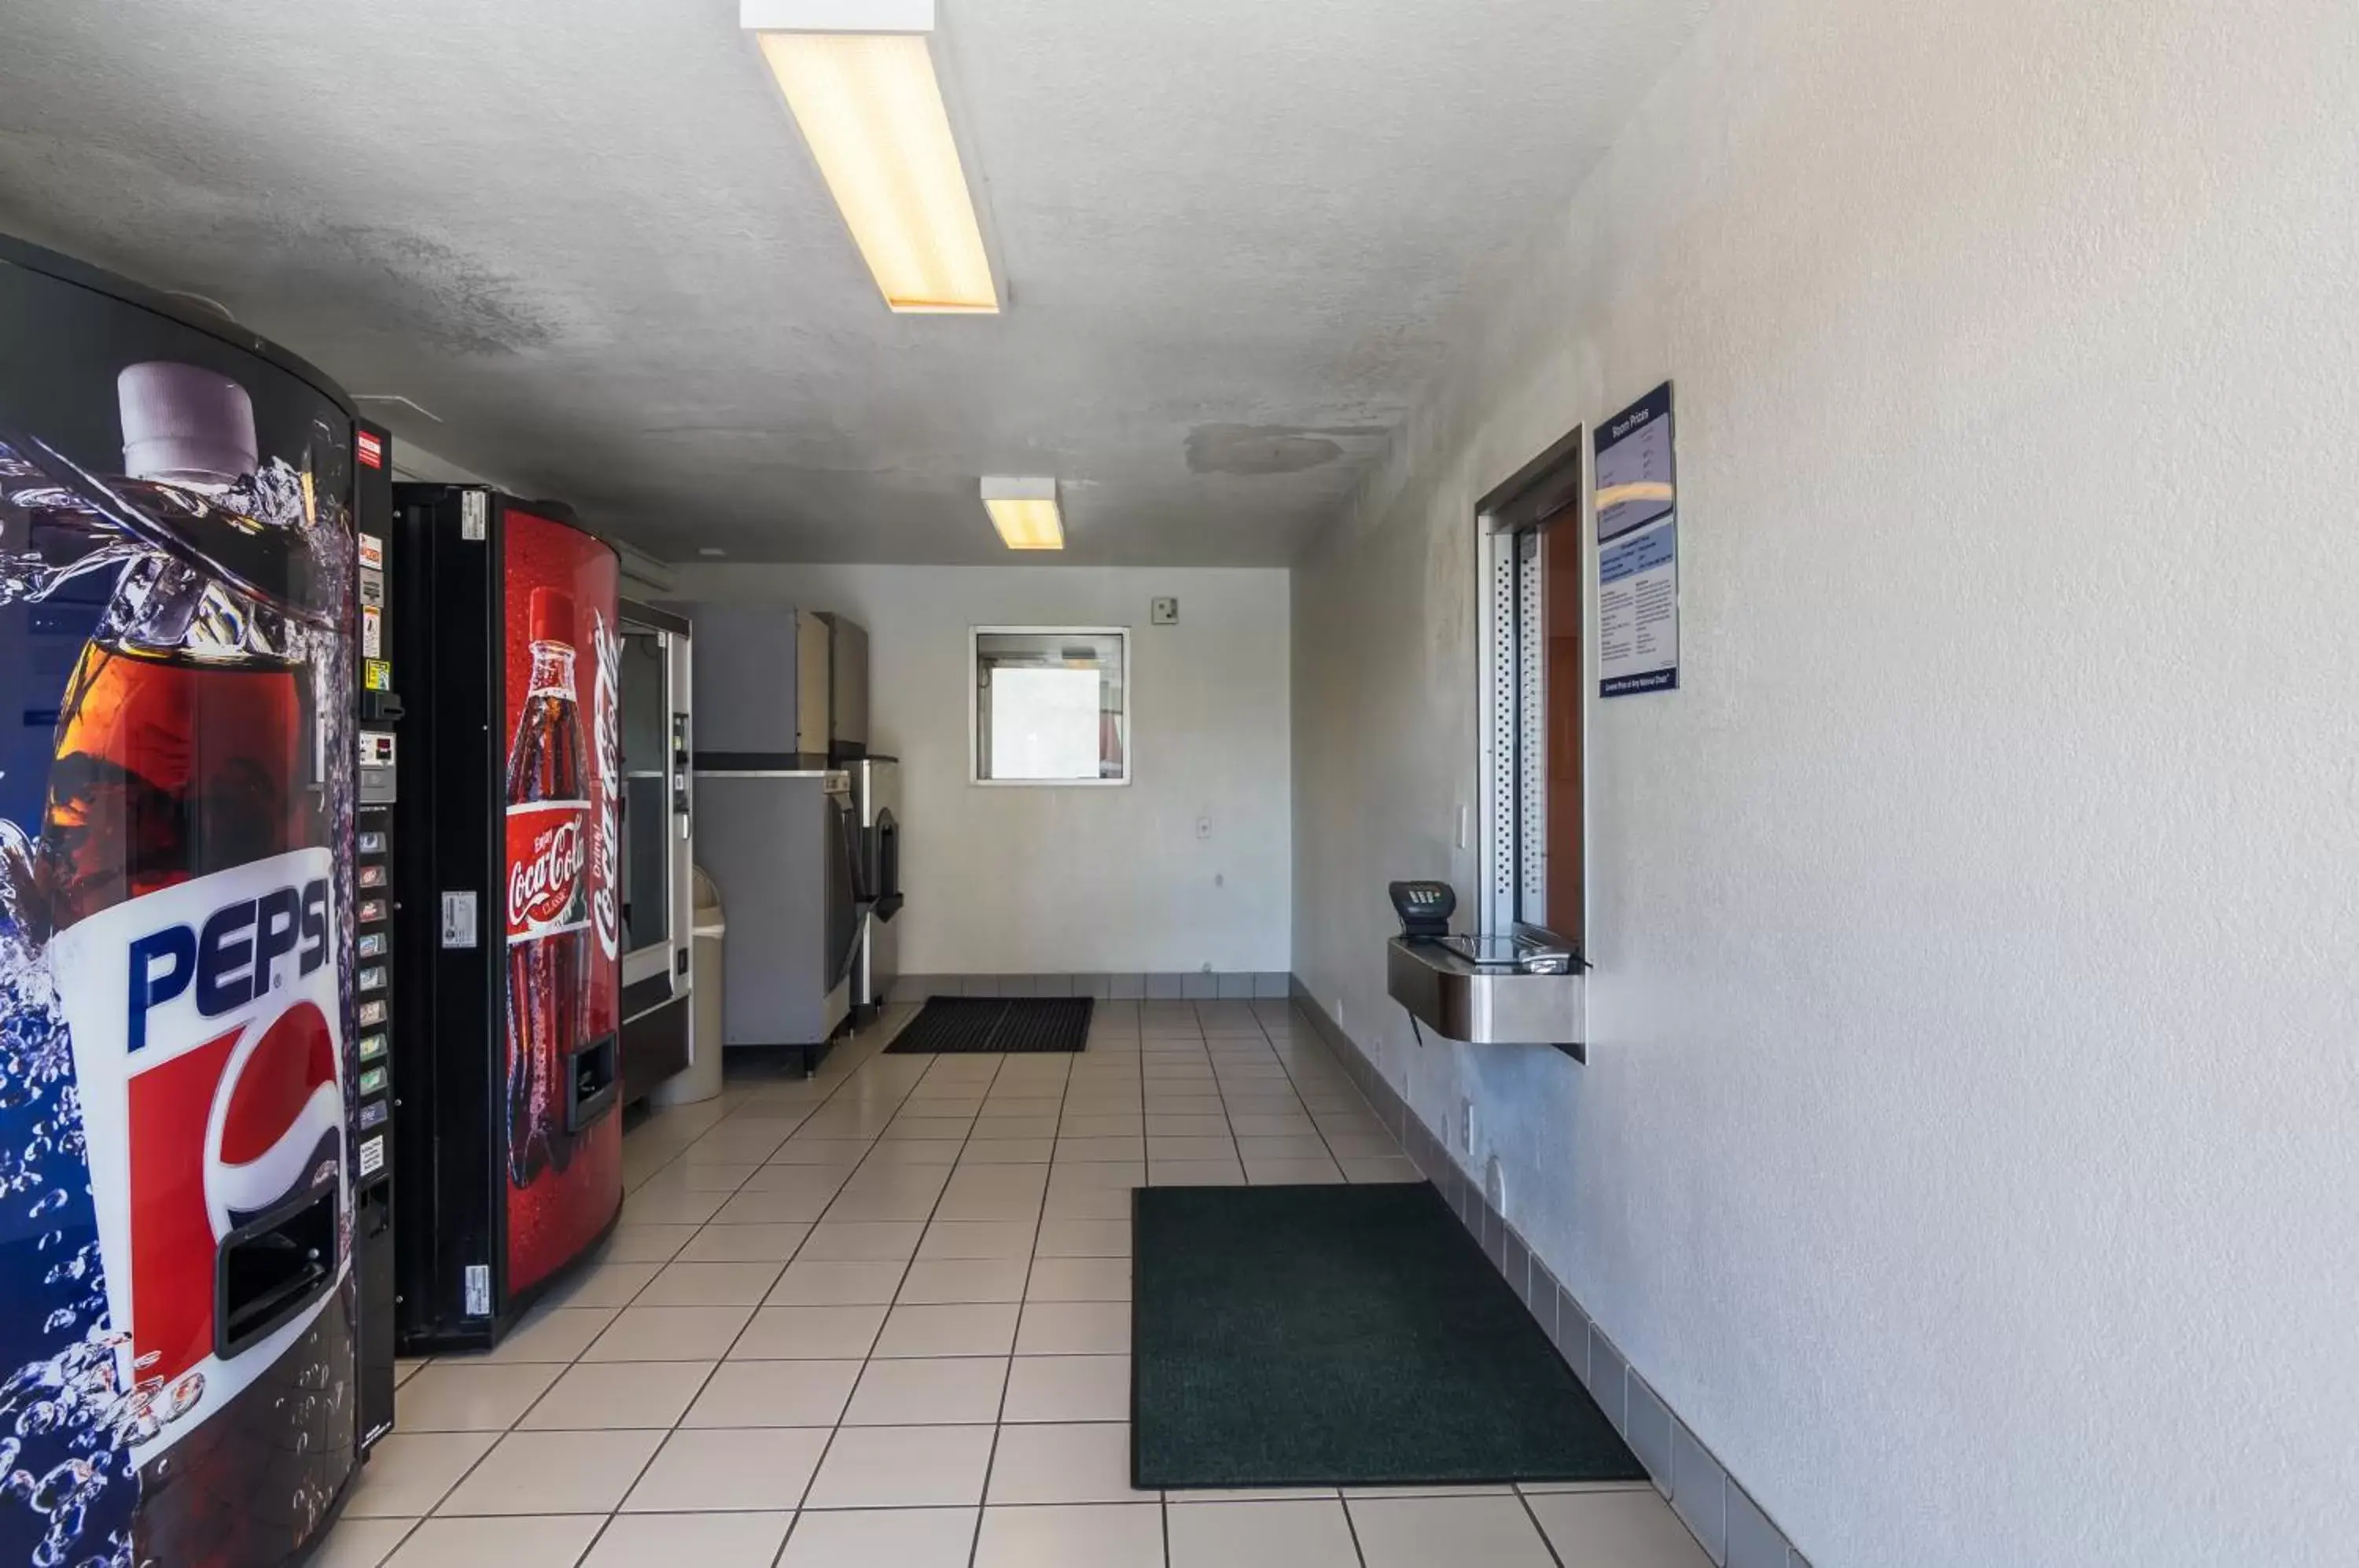 Food and drinks in Motel 6-Bellmead, TX - Waco